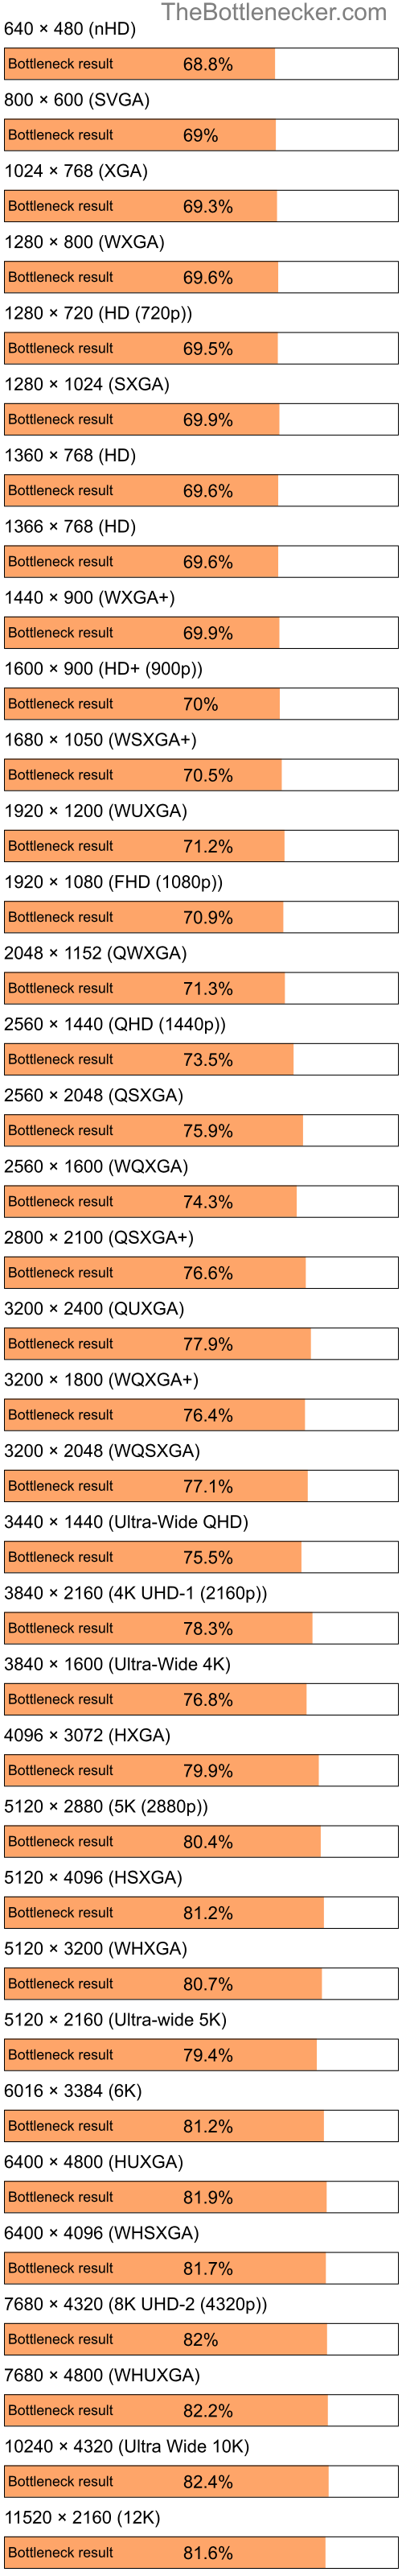 Bottleneck results by resolution for Intel Pentium 4 and NVIDIA GeForce 6600 LE in General Tasks